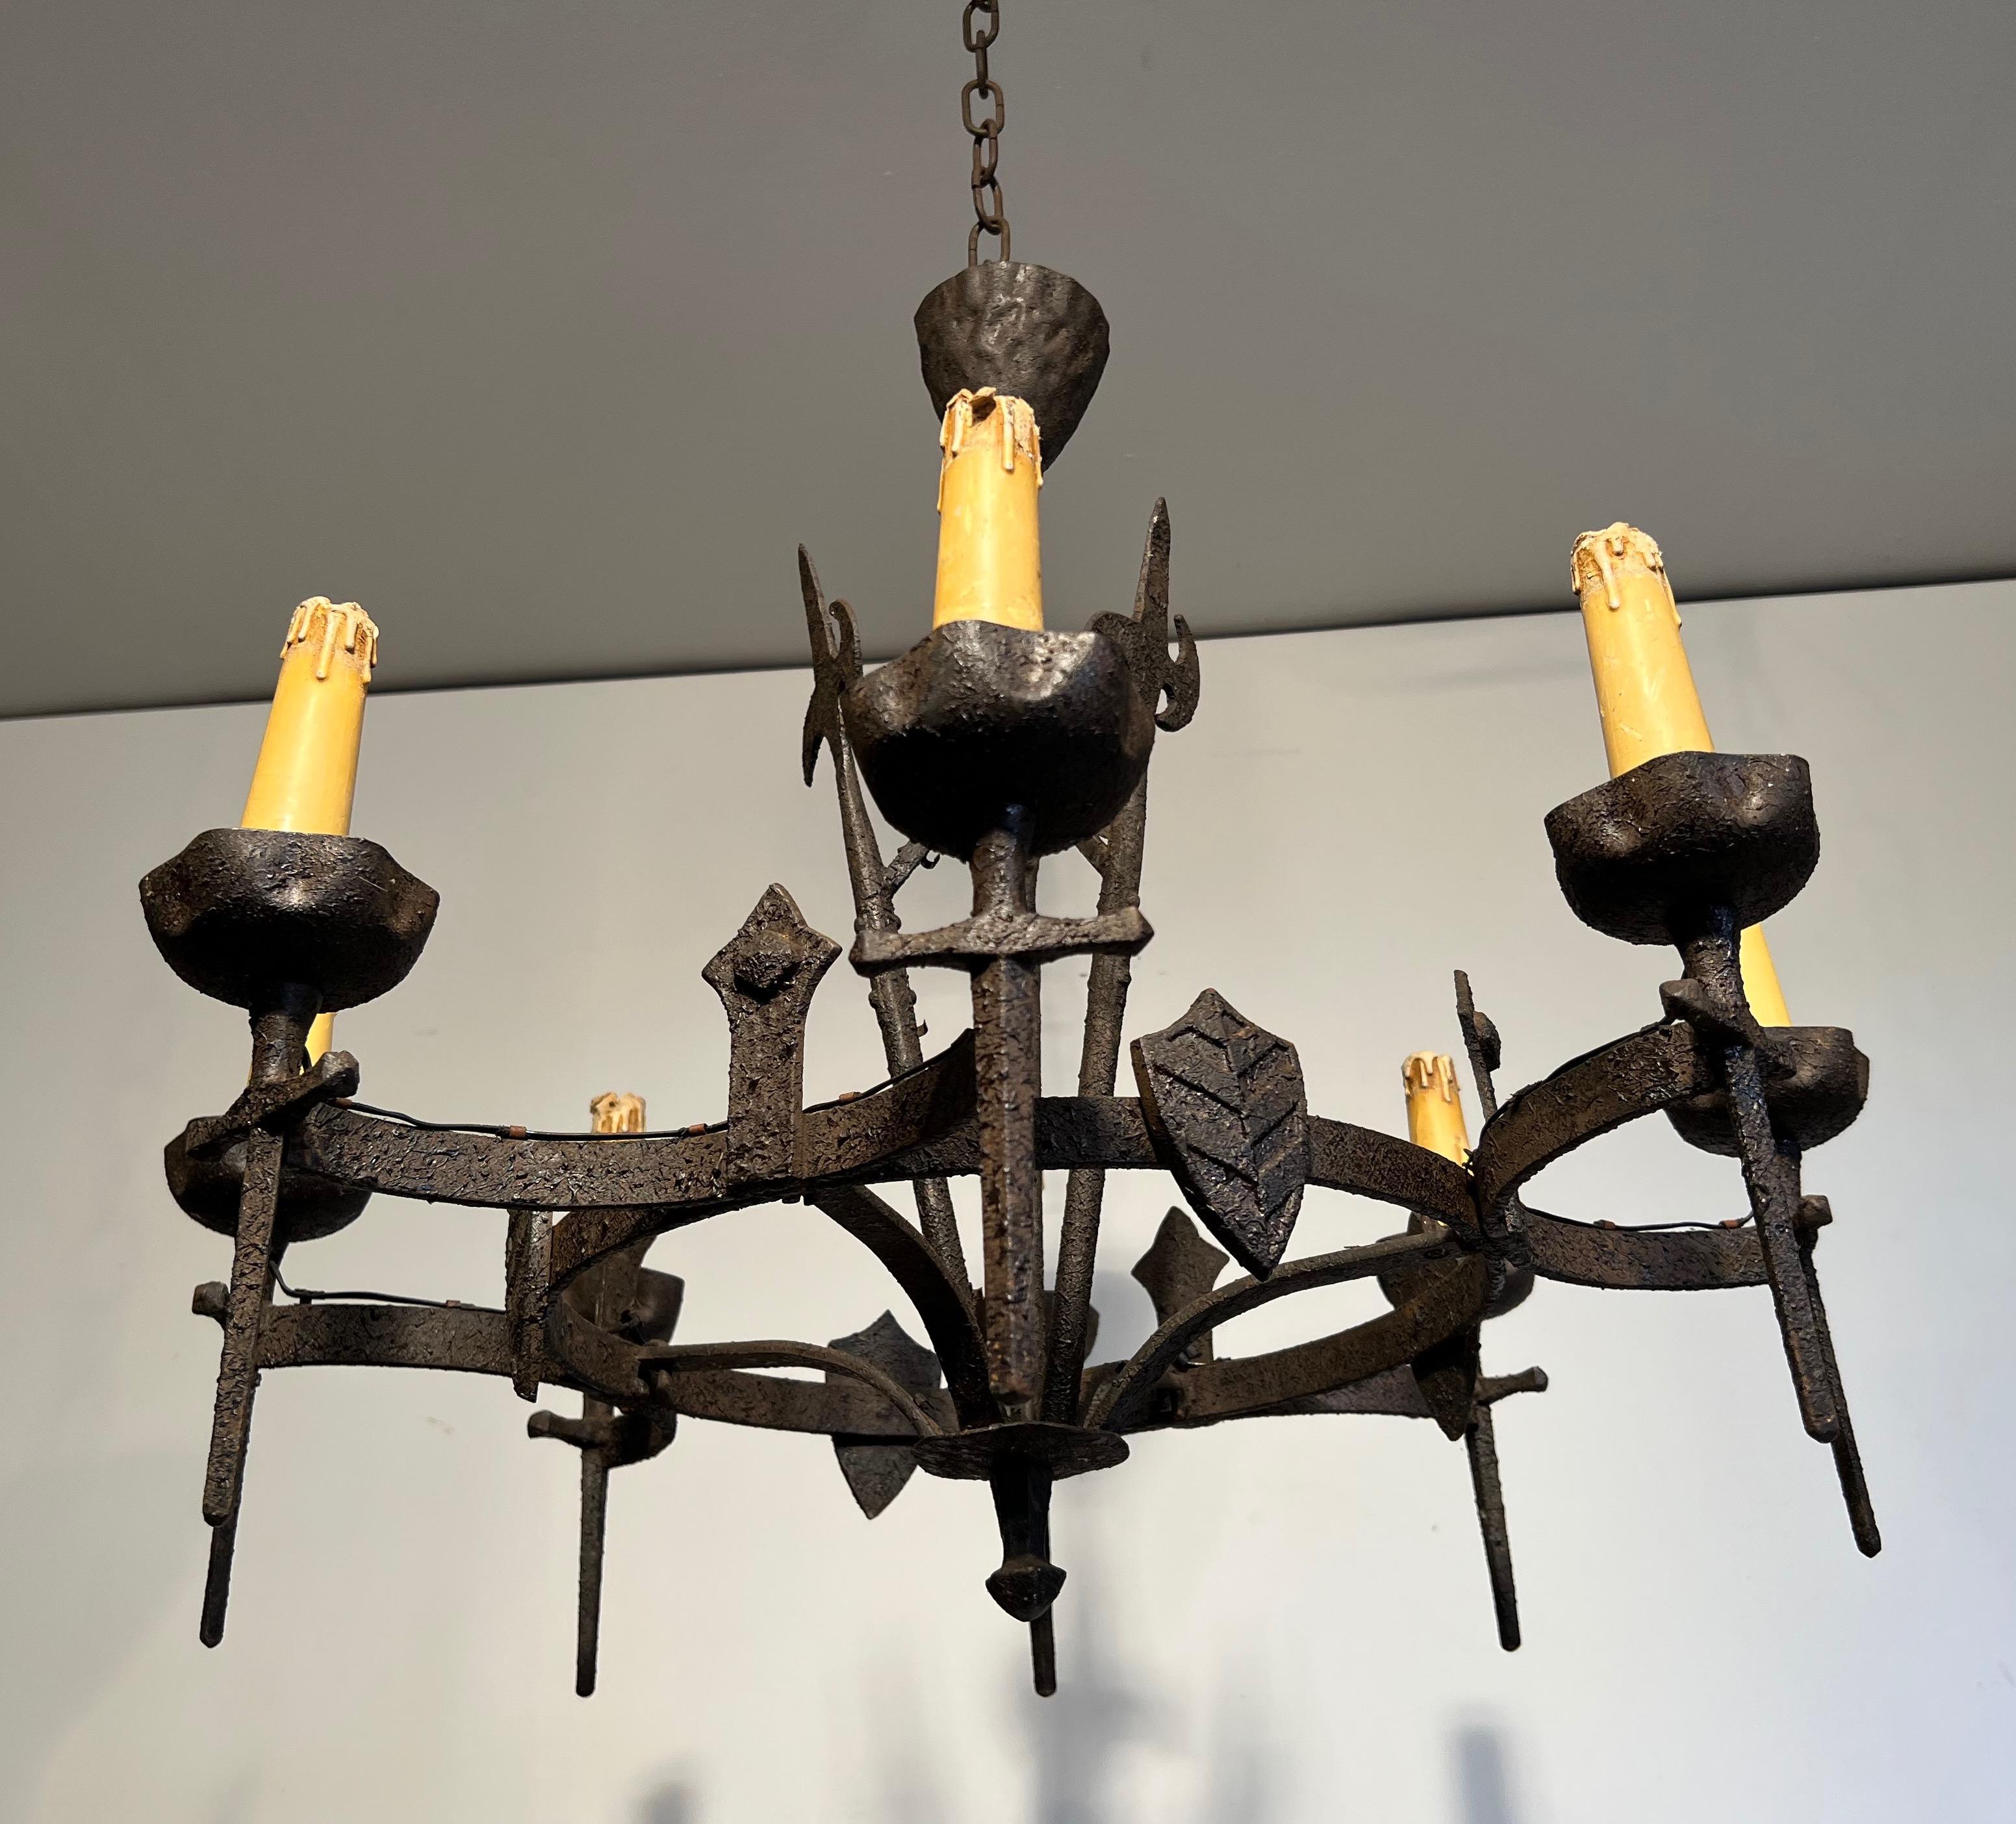 This chandelier is made of wrought iron. This is a chandelier with 8 arms in the Gothic style. This Chandelier is part of a pair of chandeliers but can be sold individually. This is a French work. Circa 1950